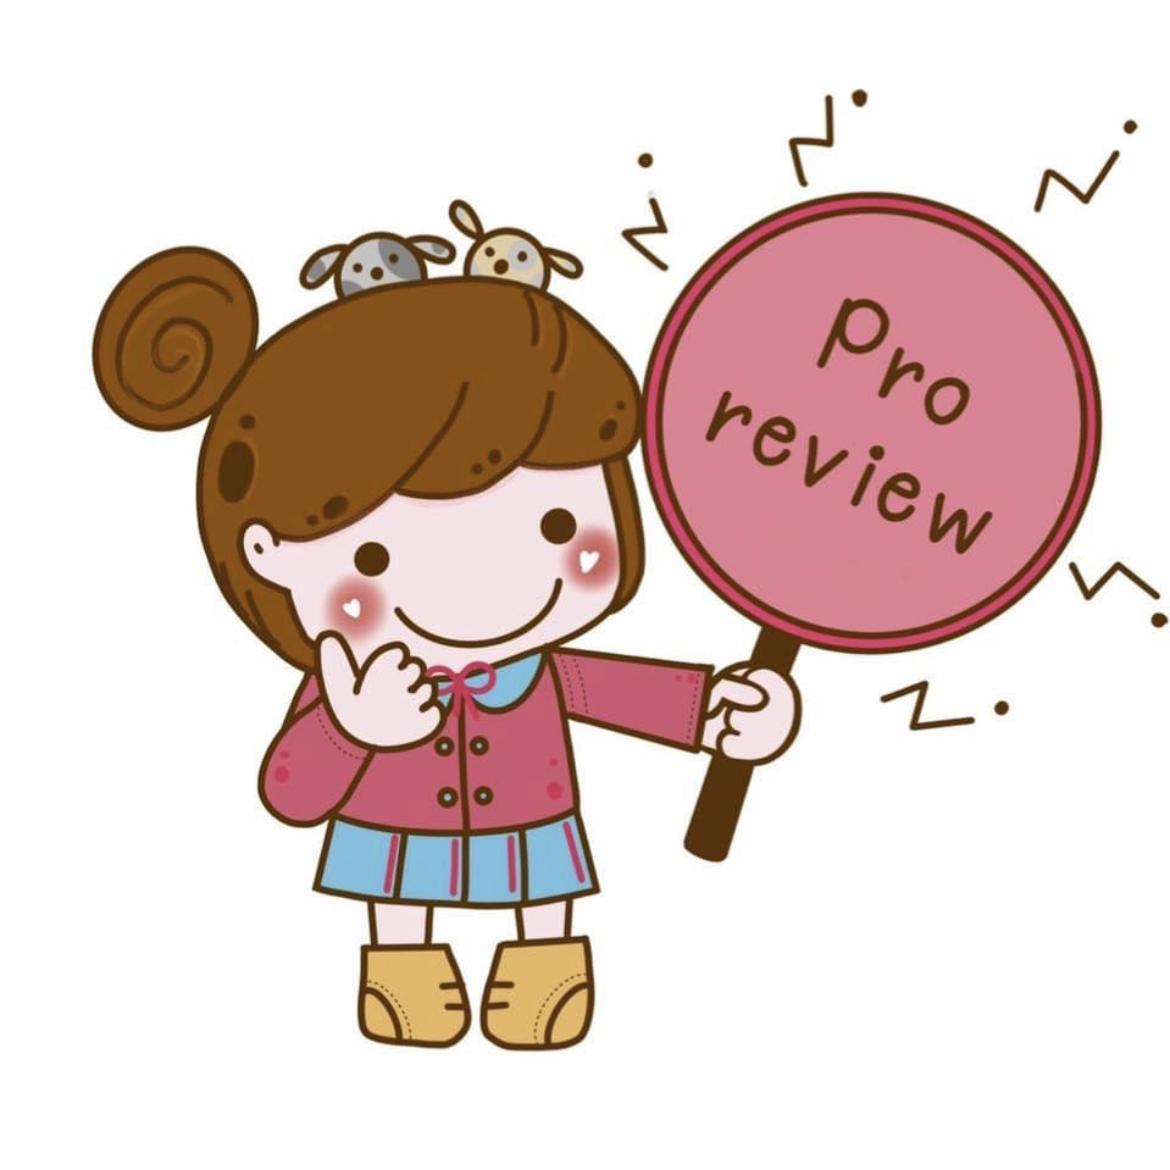 ᪥Proreview